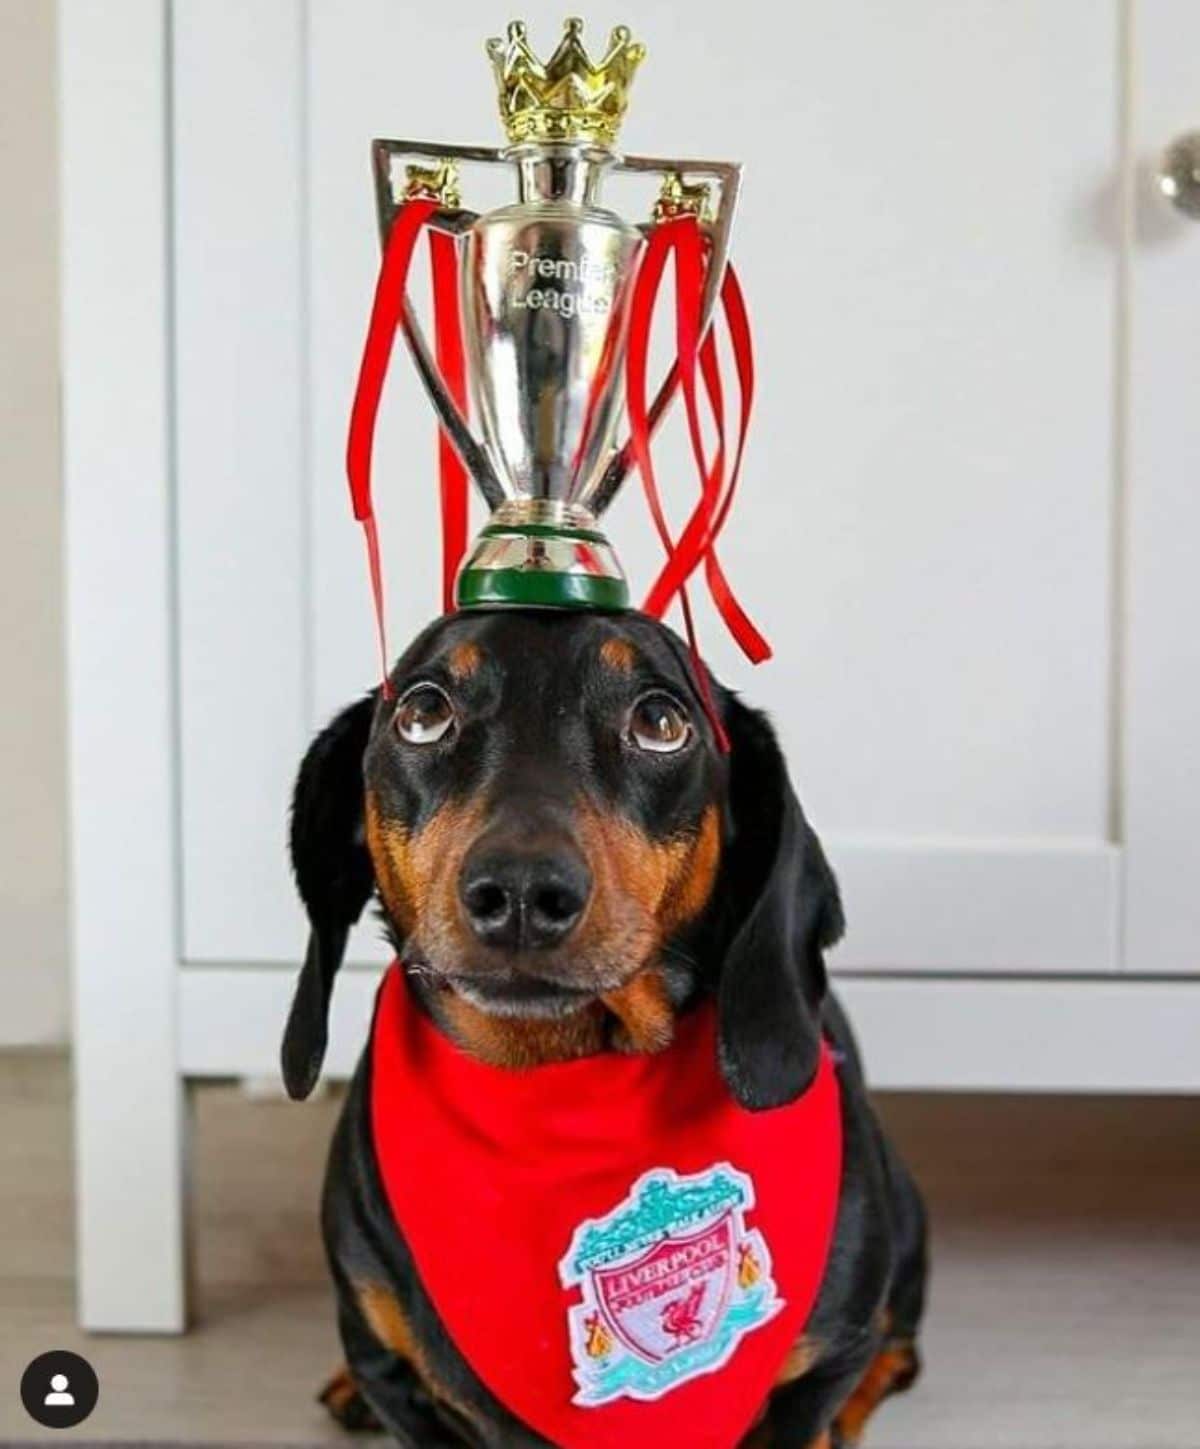 black and brown dachshund with a premier league trophy on the head and wearing a red liverpool bandana